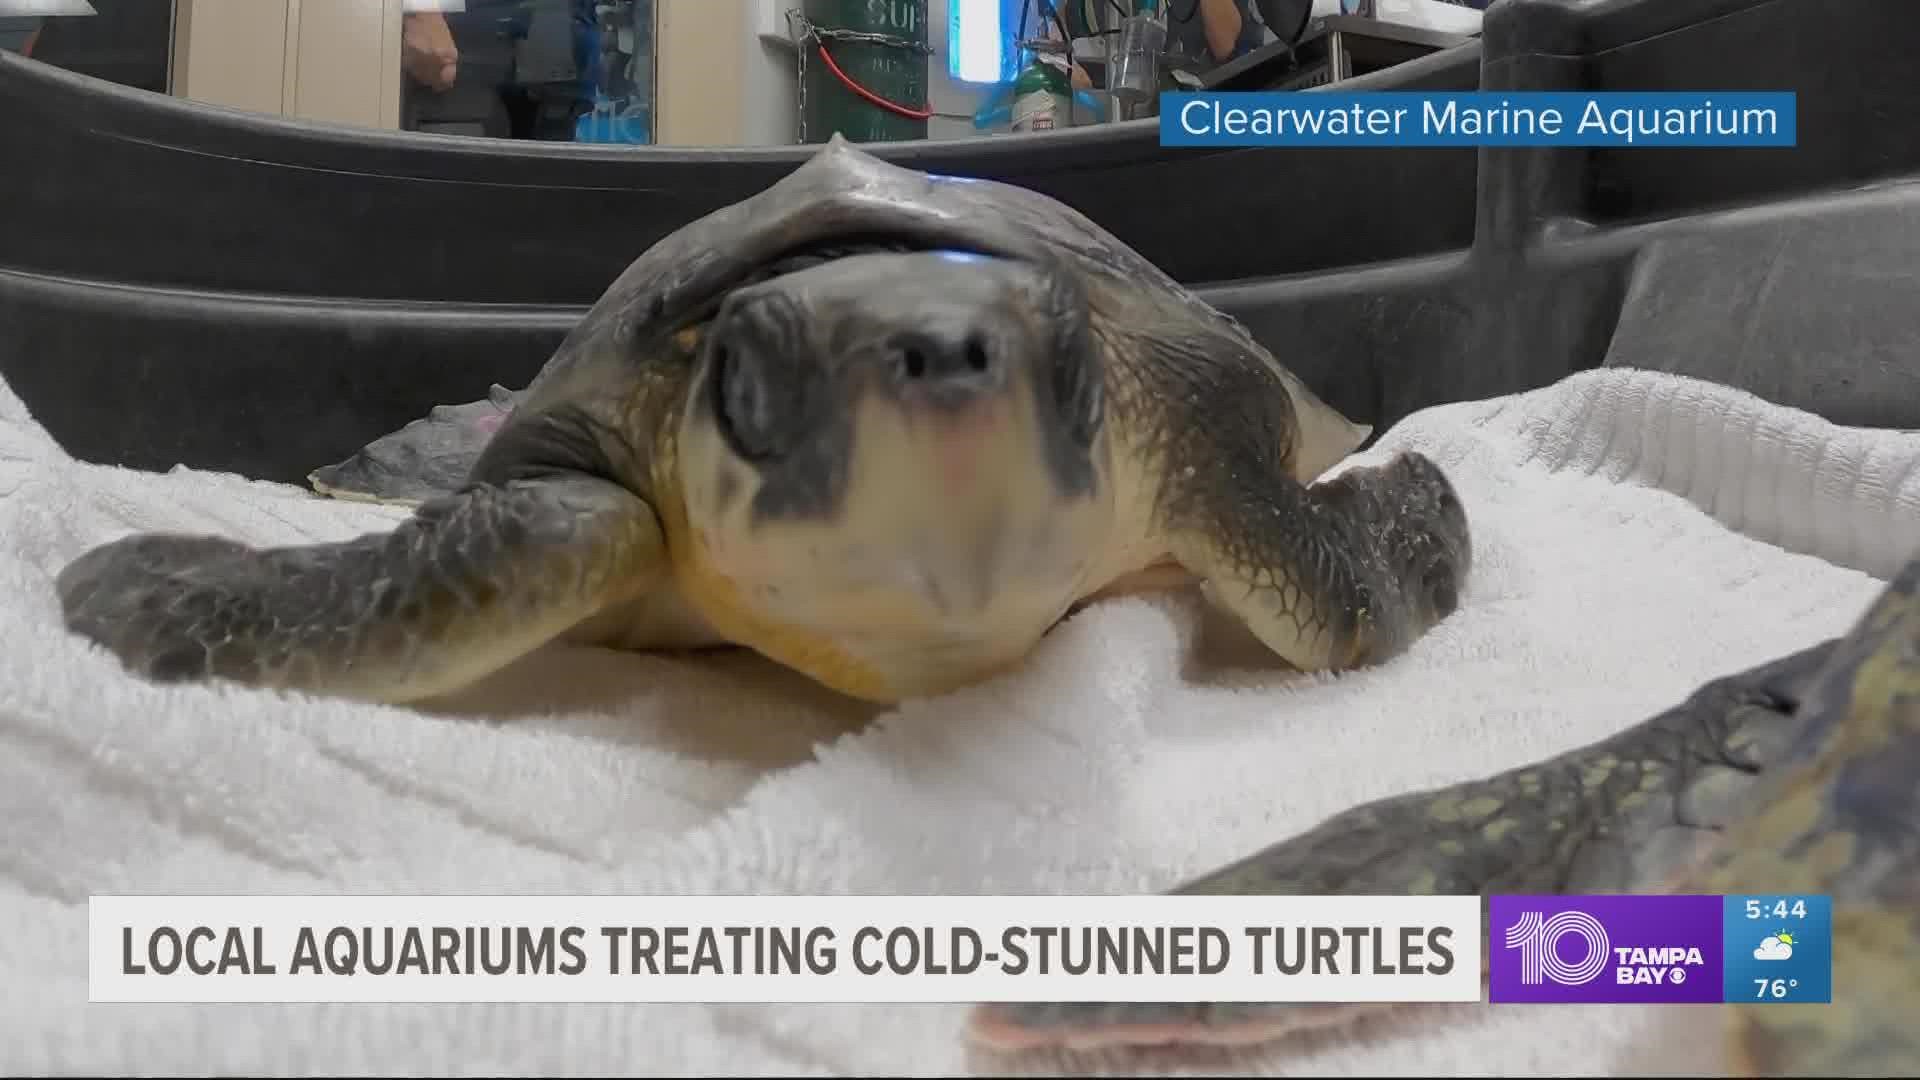 The New England Aquarium said that more than 500 turtles have washed ashore on Cape Cod.